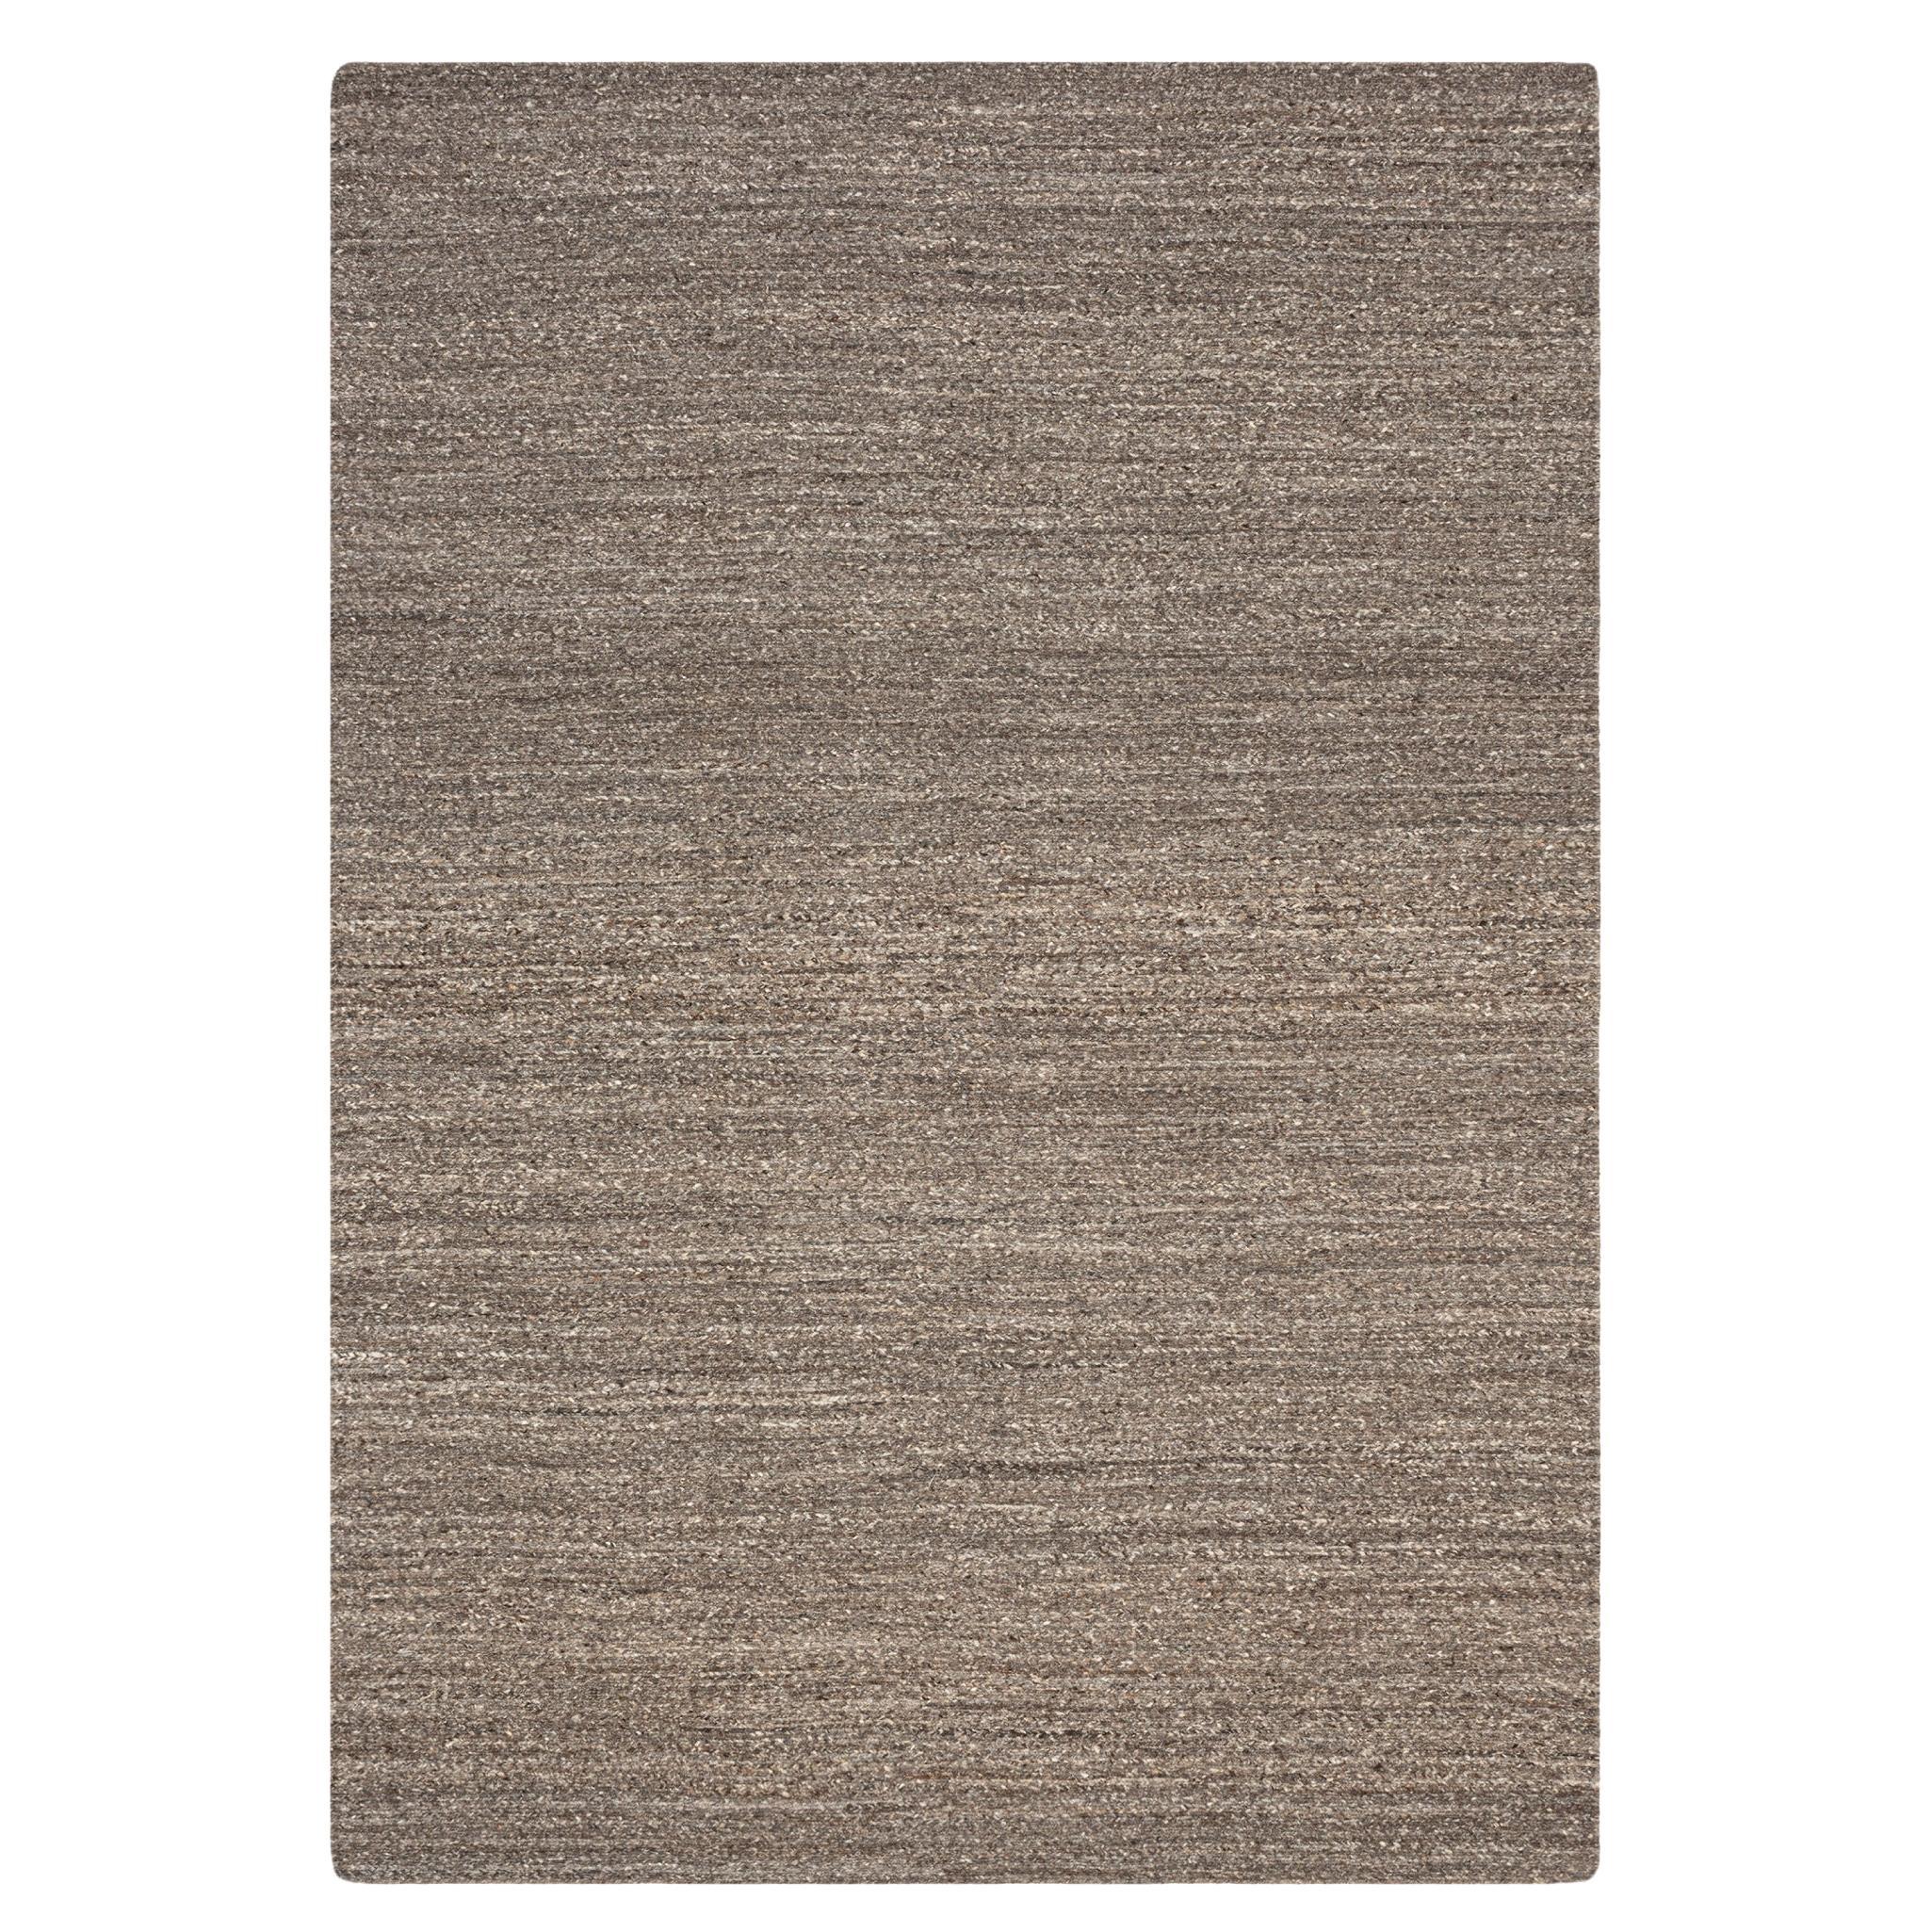 Chunky Sumac Natural Black Flatweave Rug by Knots Rugs For Sale